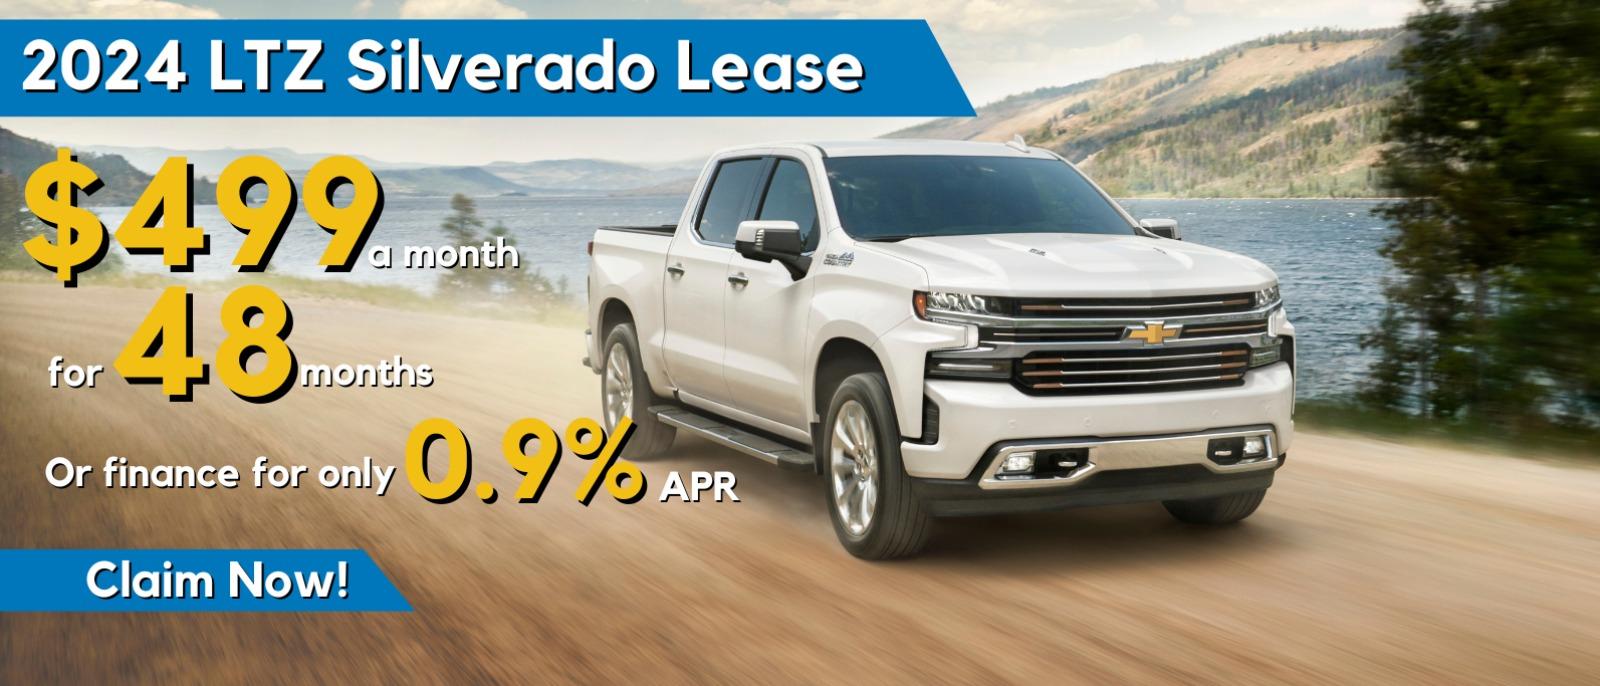 2024 LTZ Silverado Lease
$499 a month for 48 months or finance for only 0.9% apr